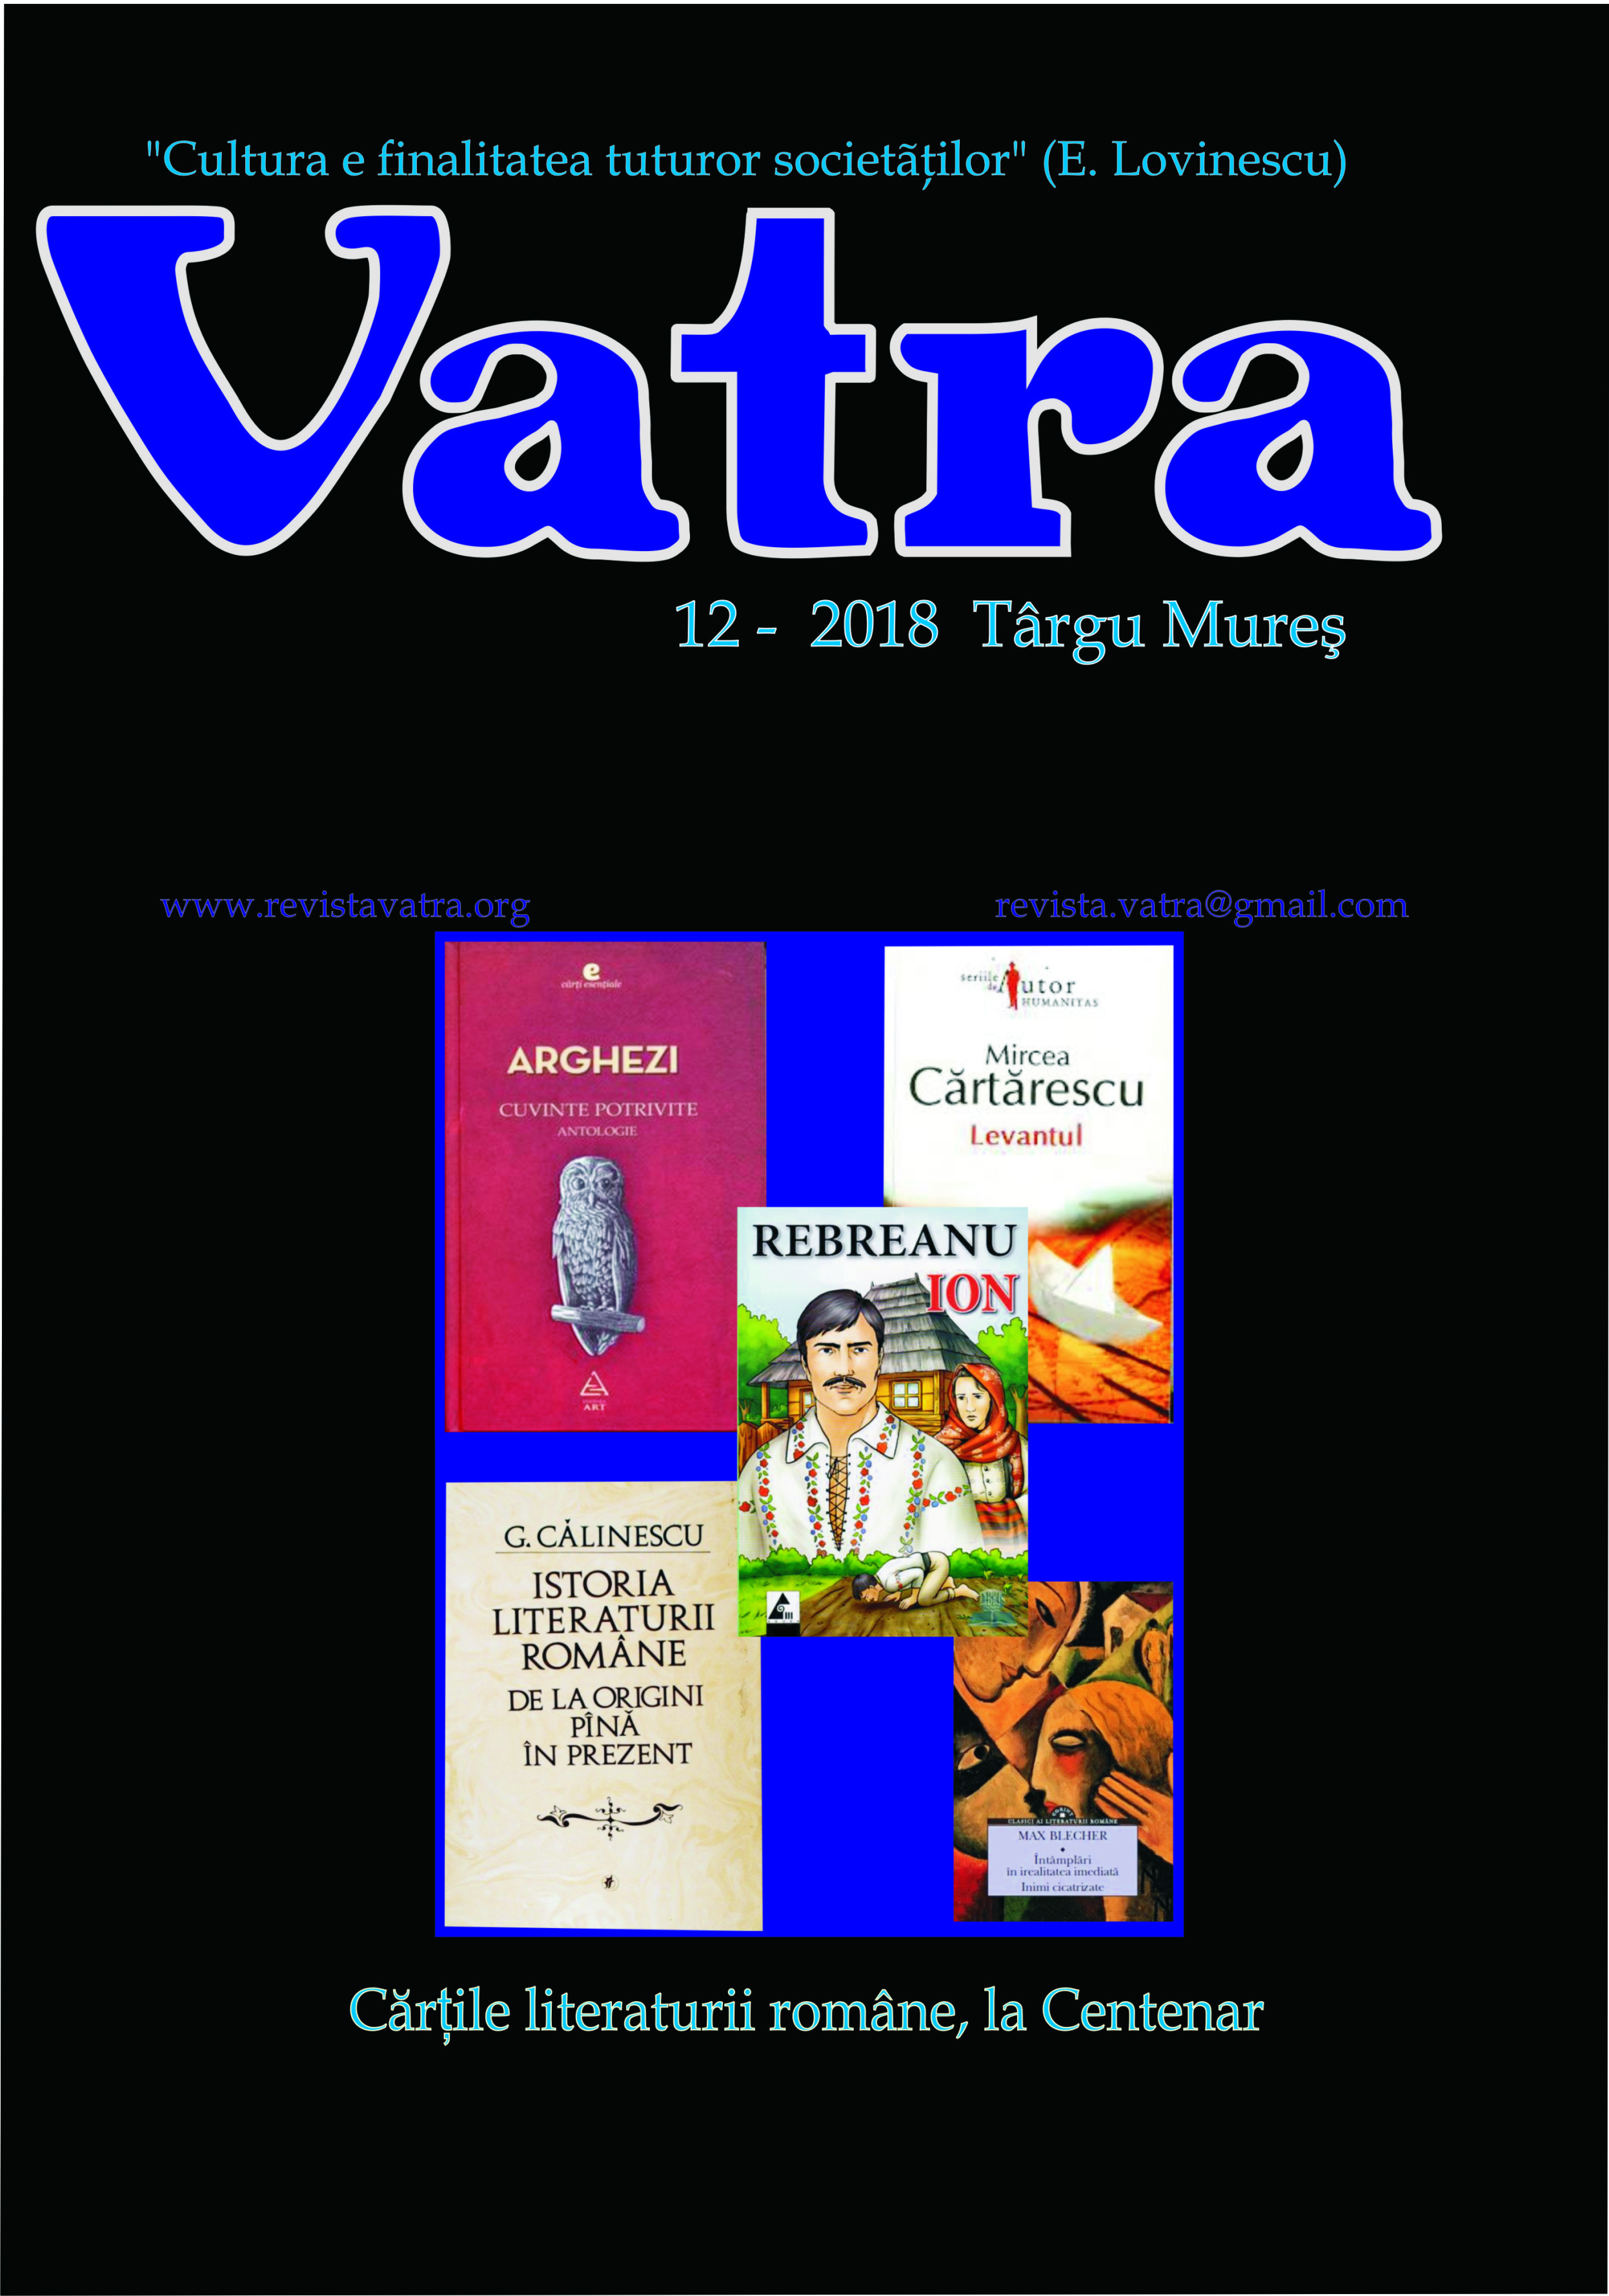 Books of Romanian Literature at the Centenary Cover Image